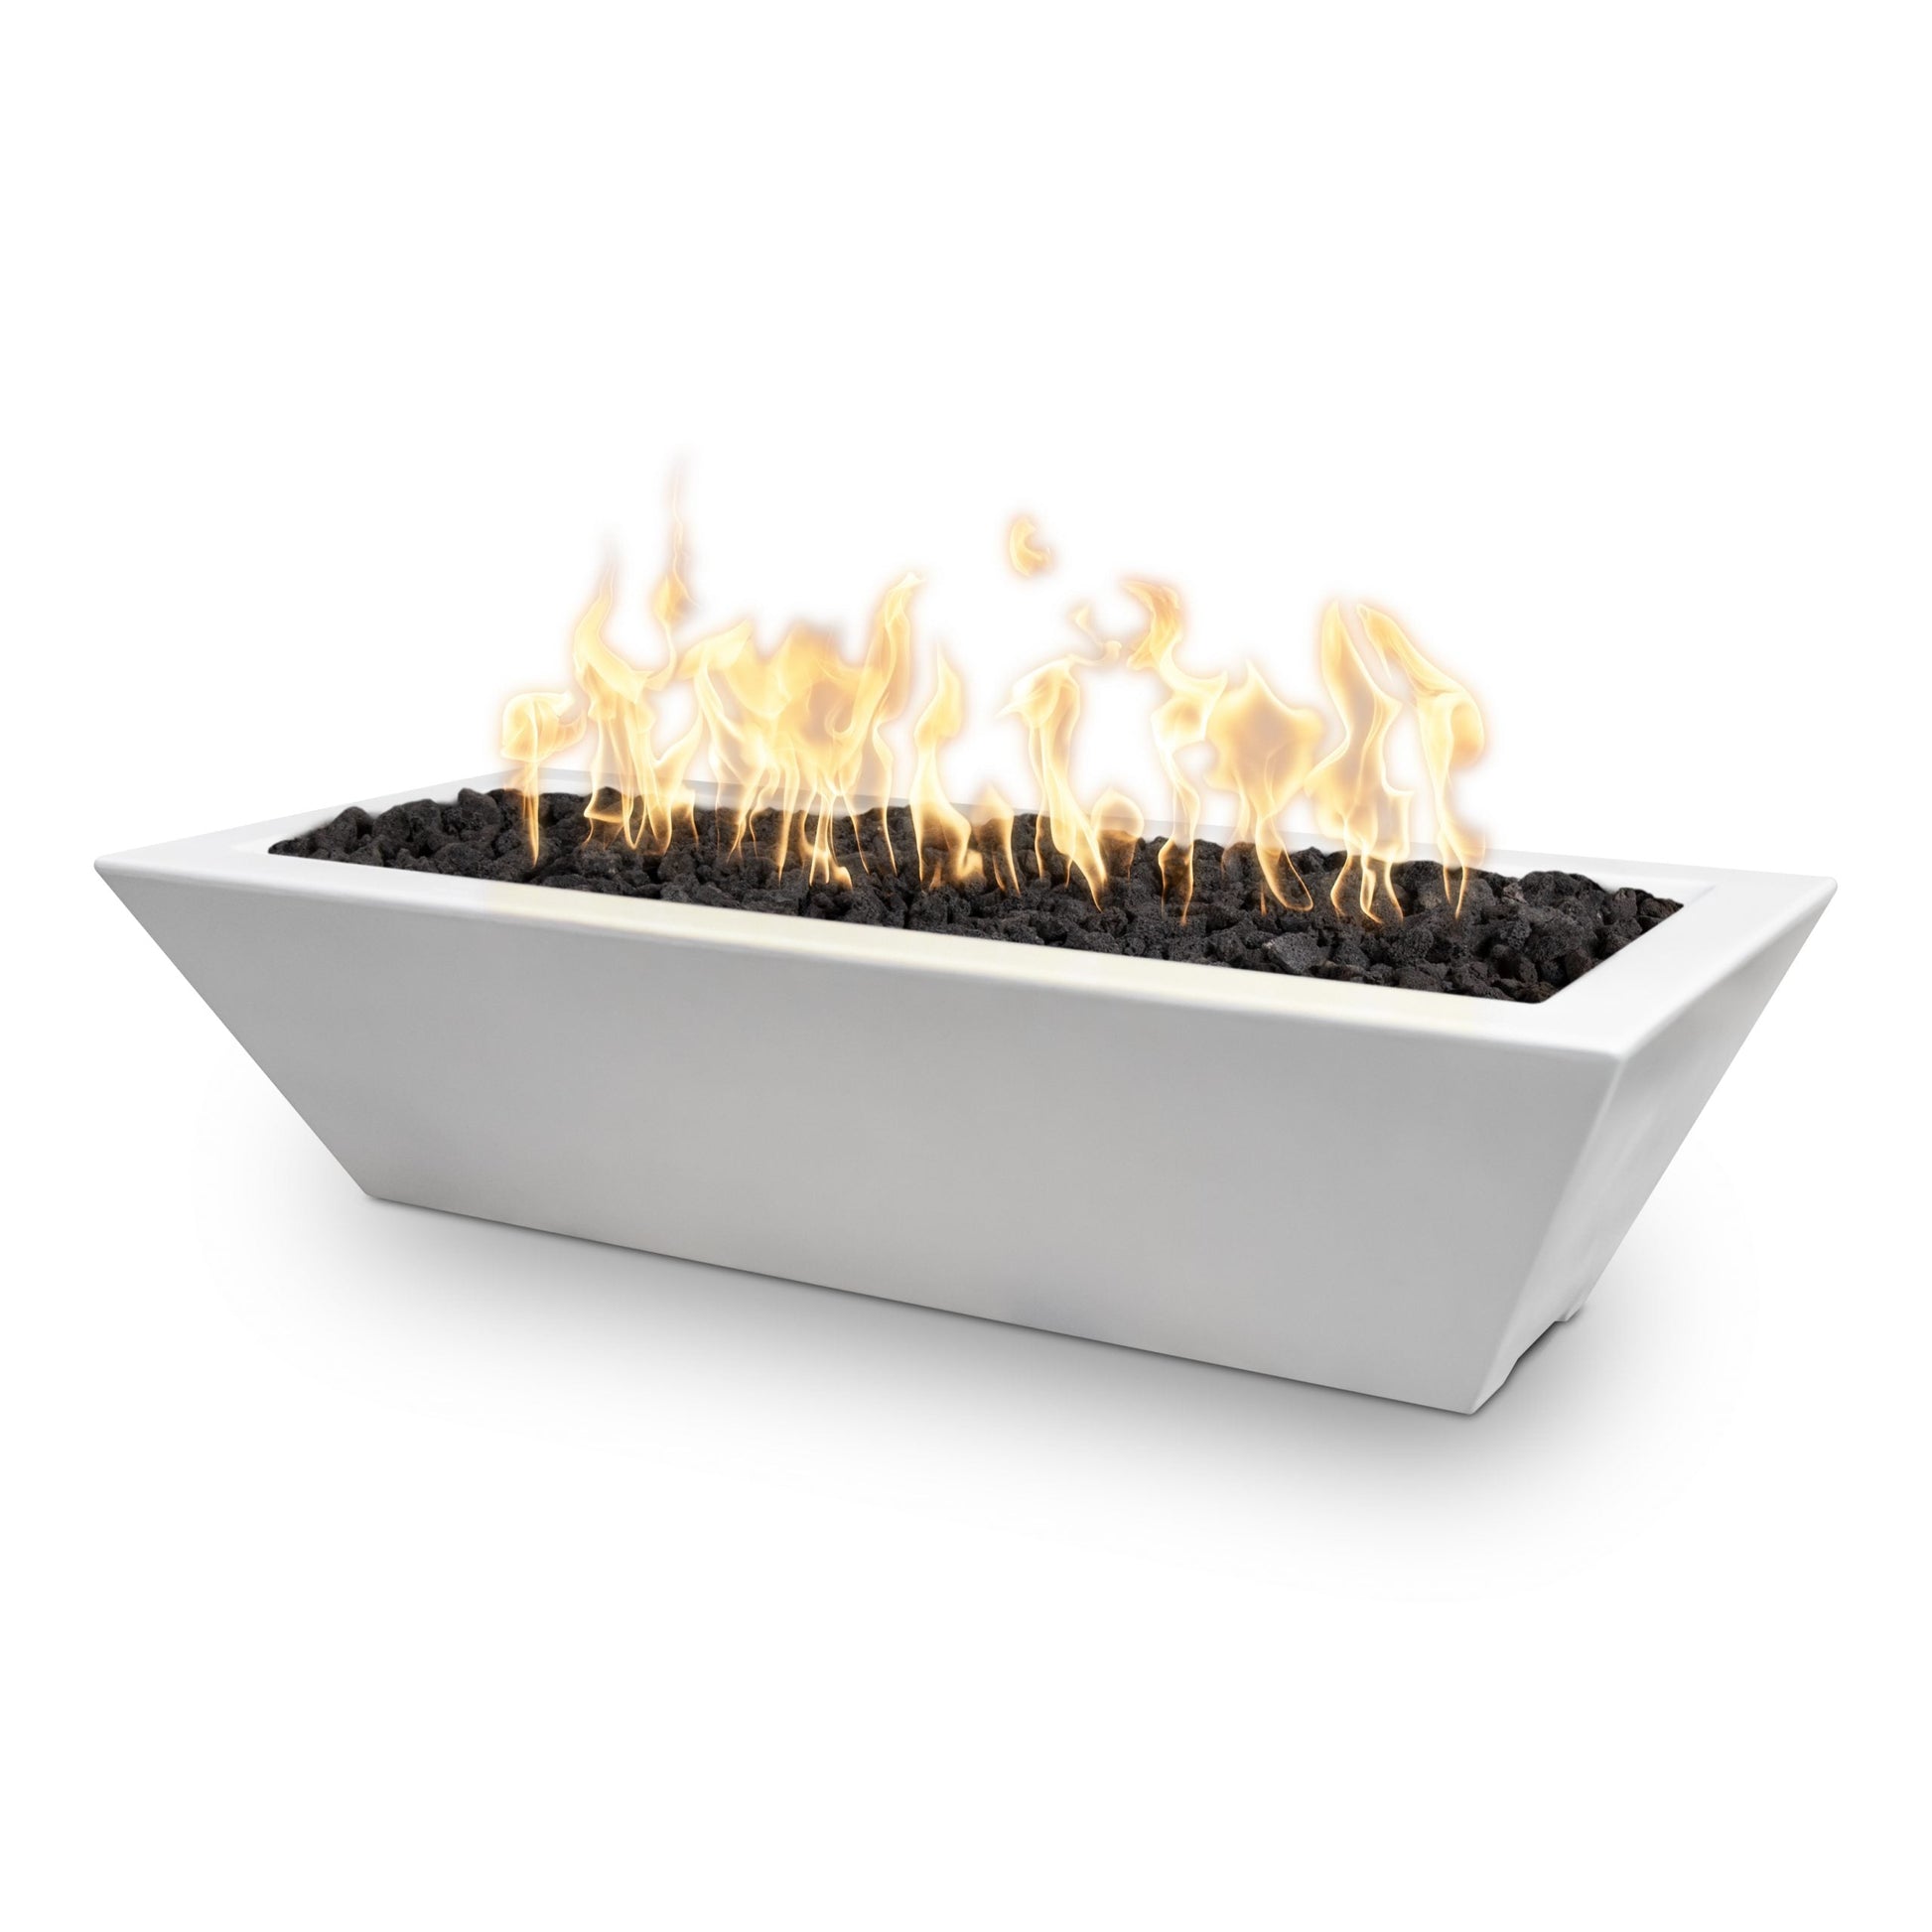 The Outdoor Plus Linear Maya 60" Metallic Silver GFRC Concrete Liquid Propane Fire Bowl with Match Lit Ignition